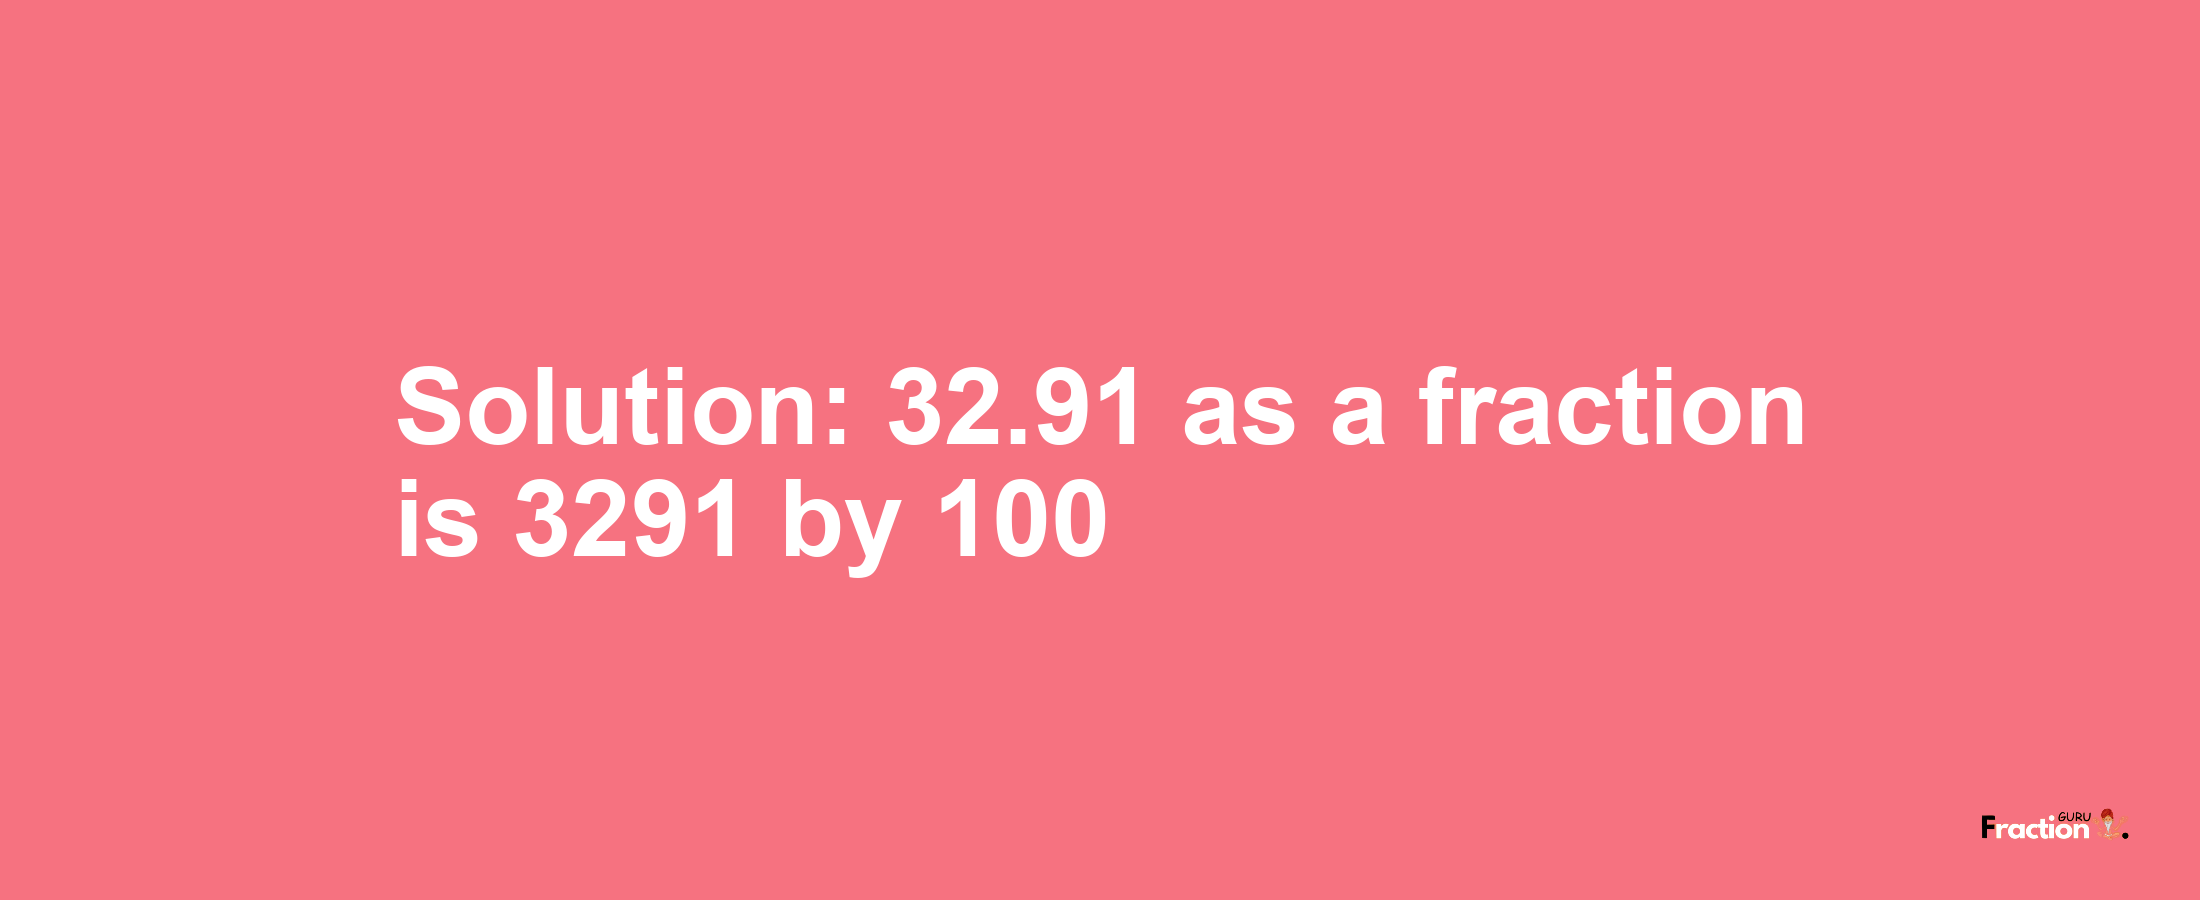 Solution:32.91 as a fraction is 3291/100